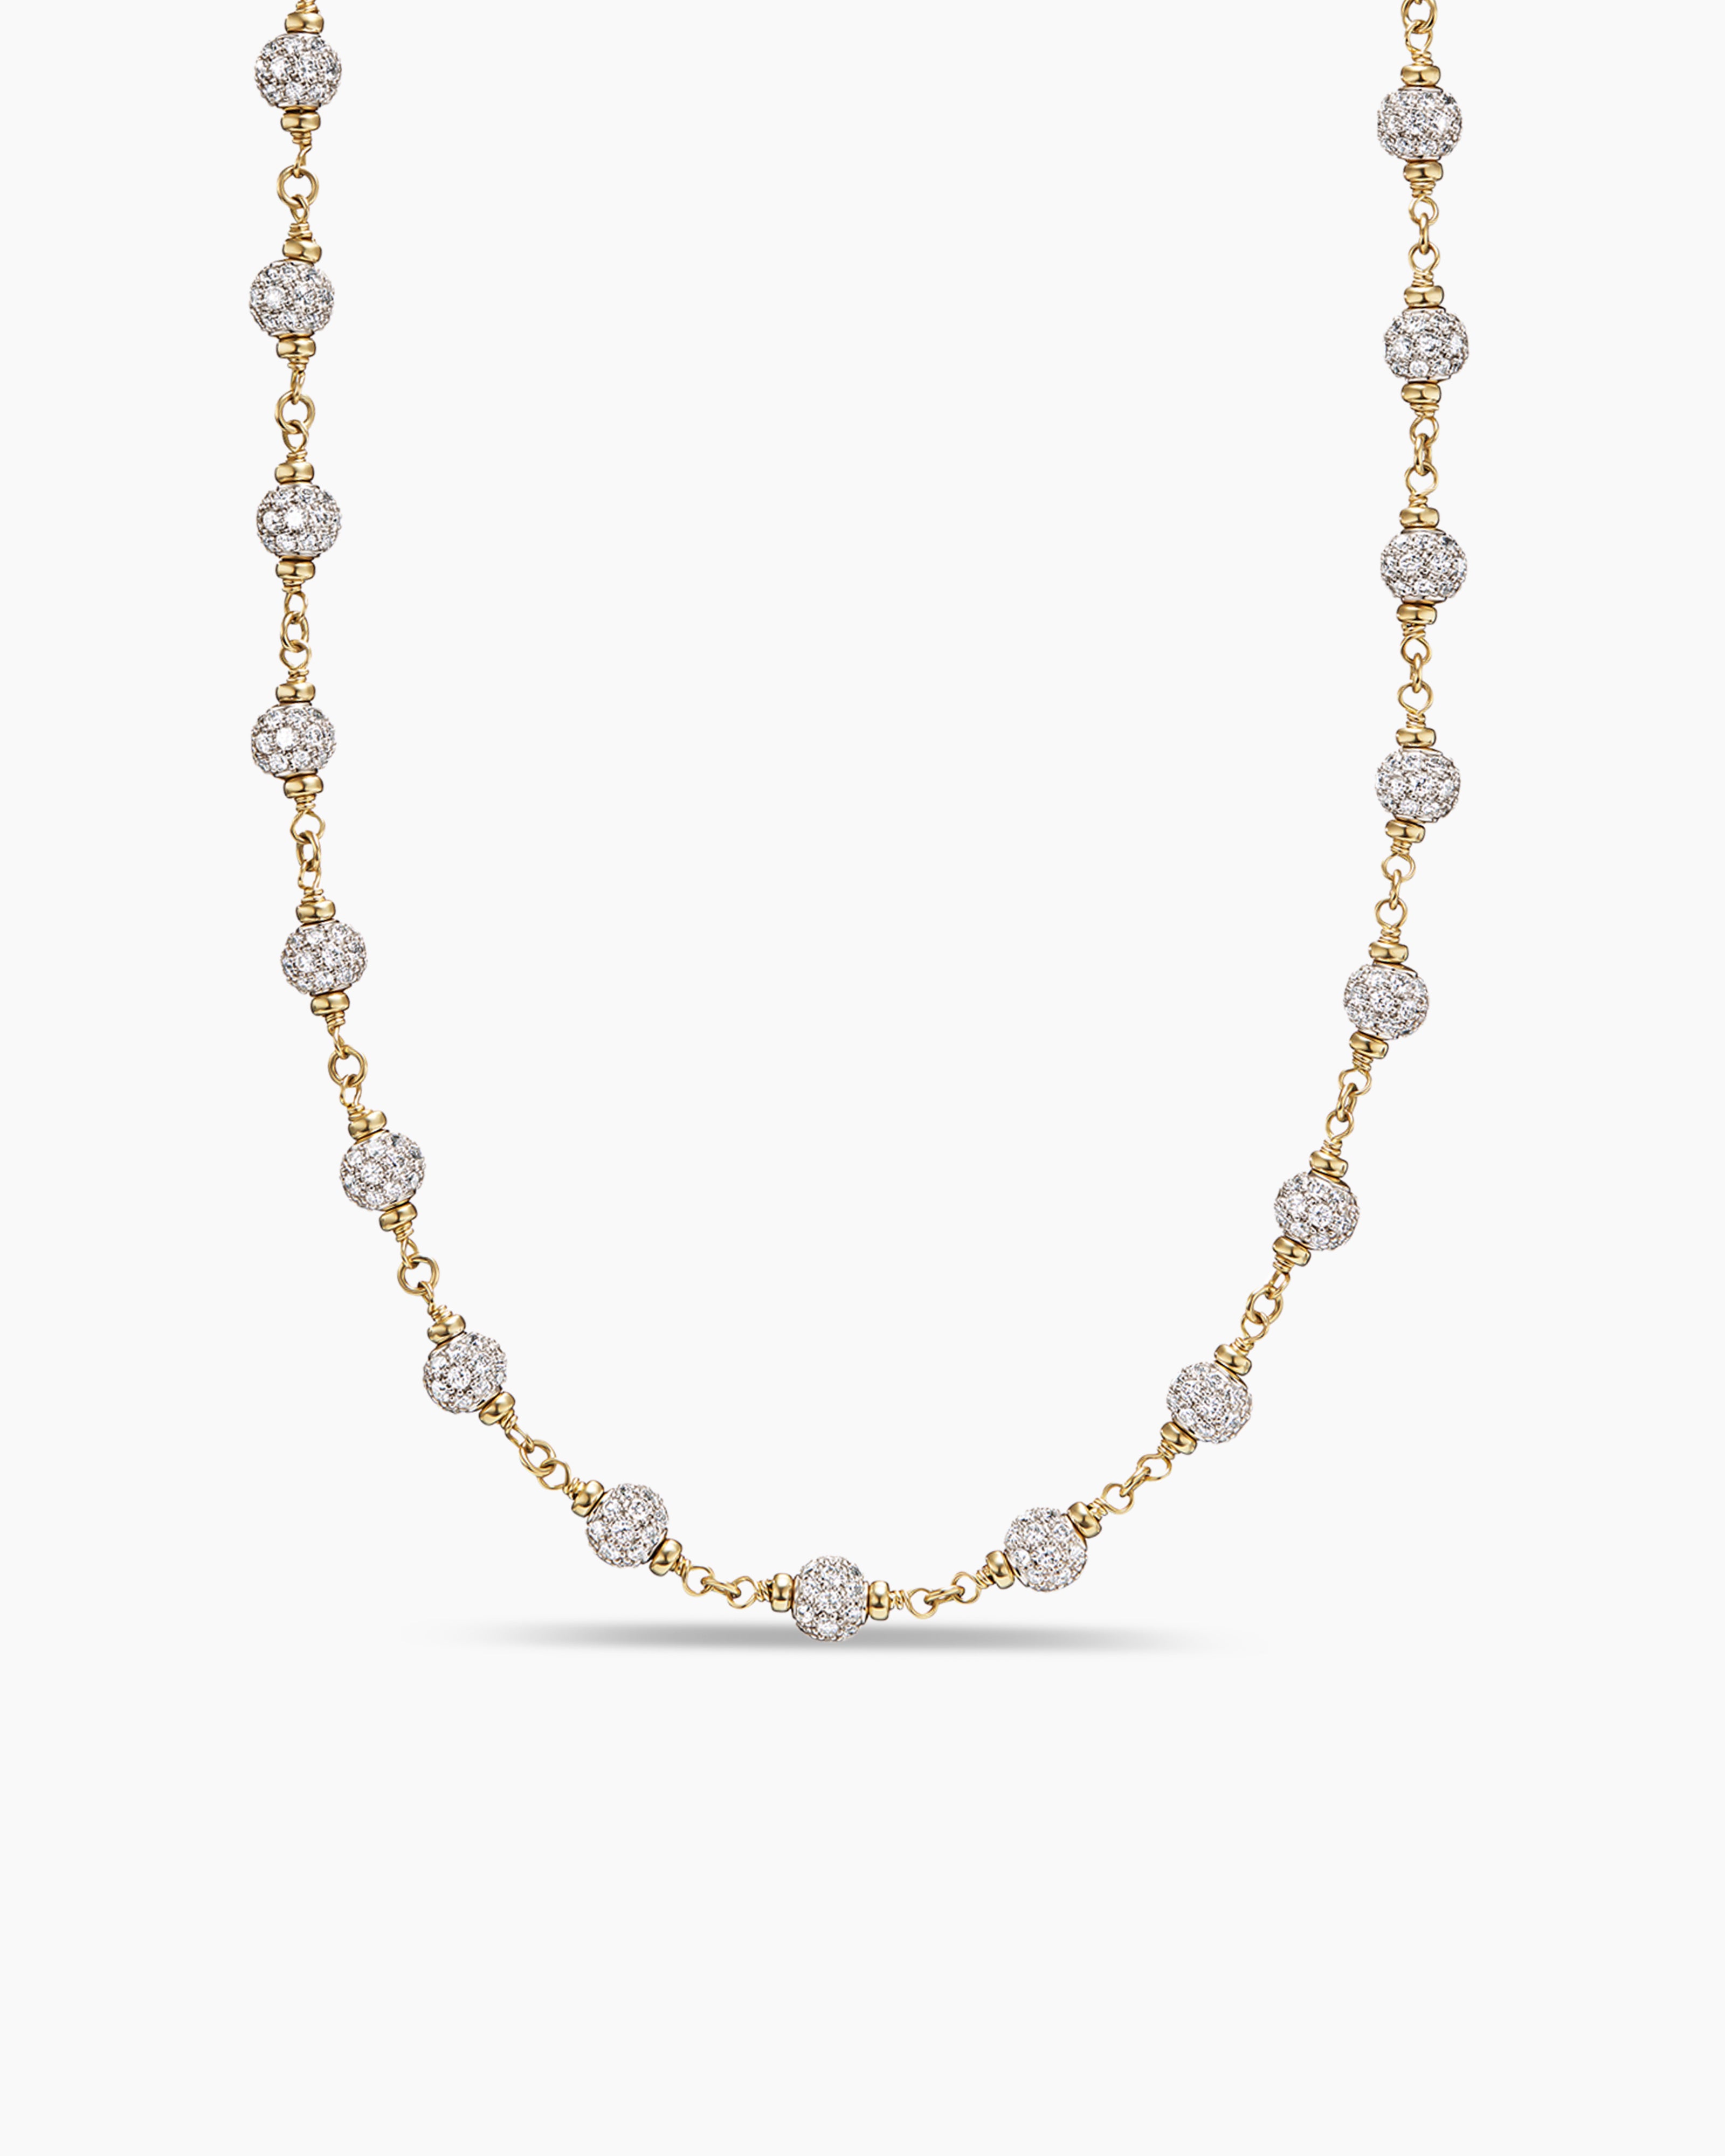 18kt white/yellow gold necklace